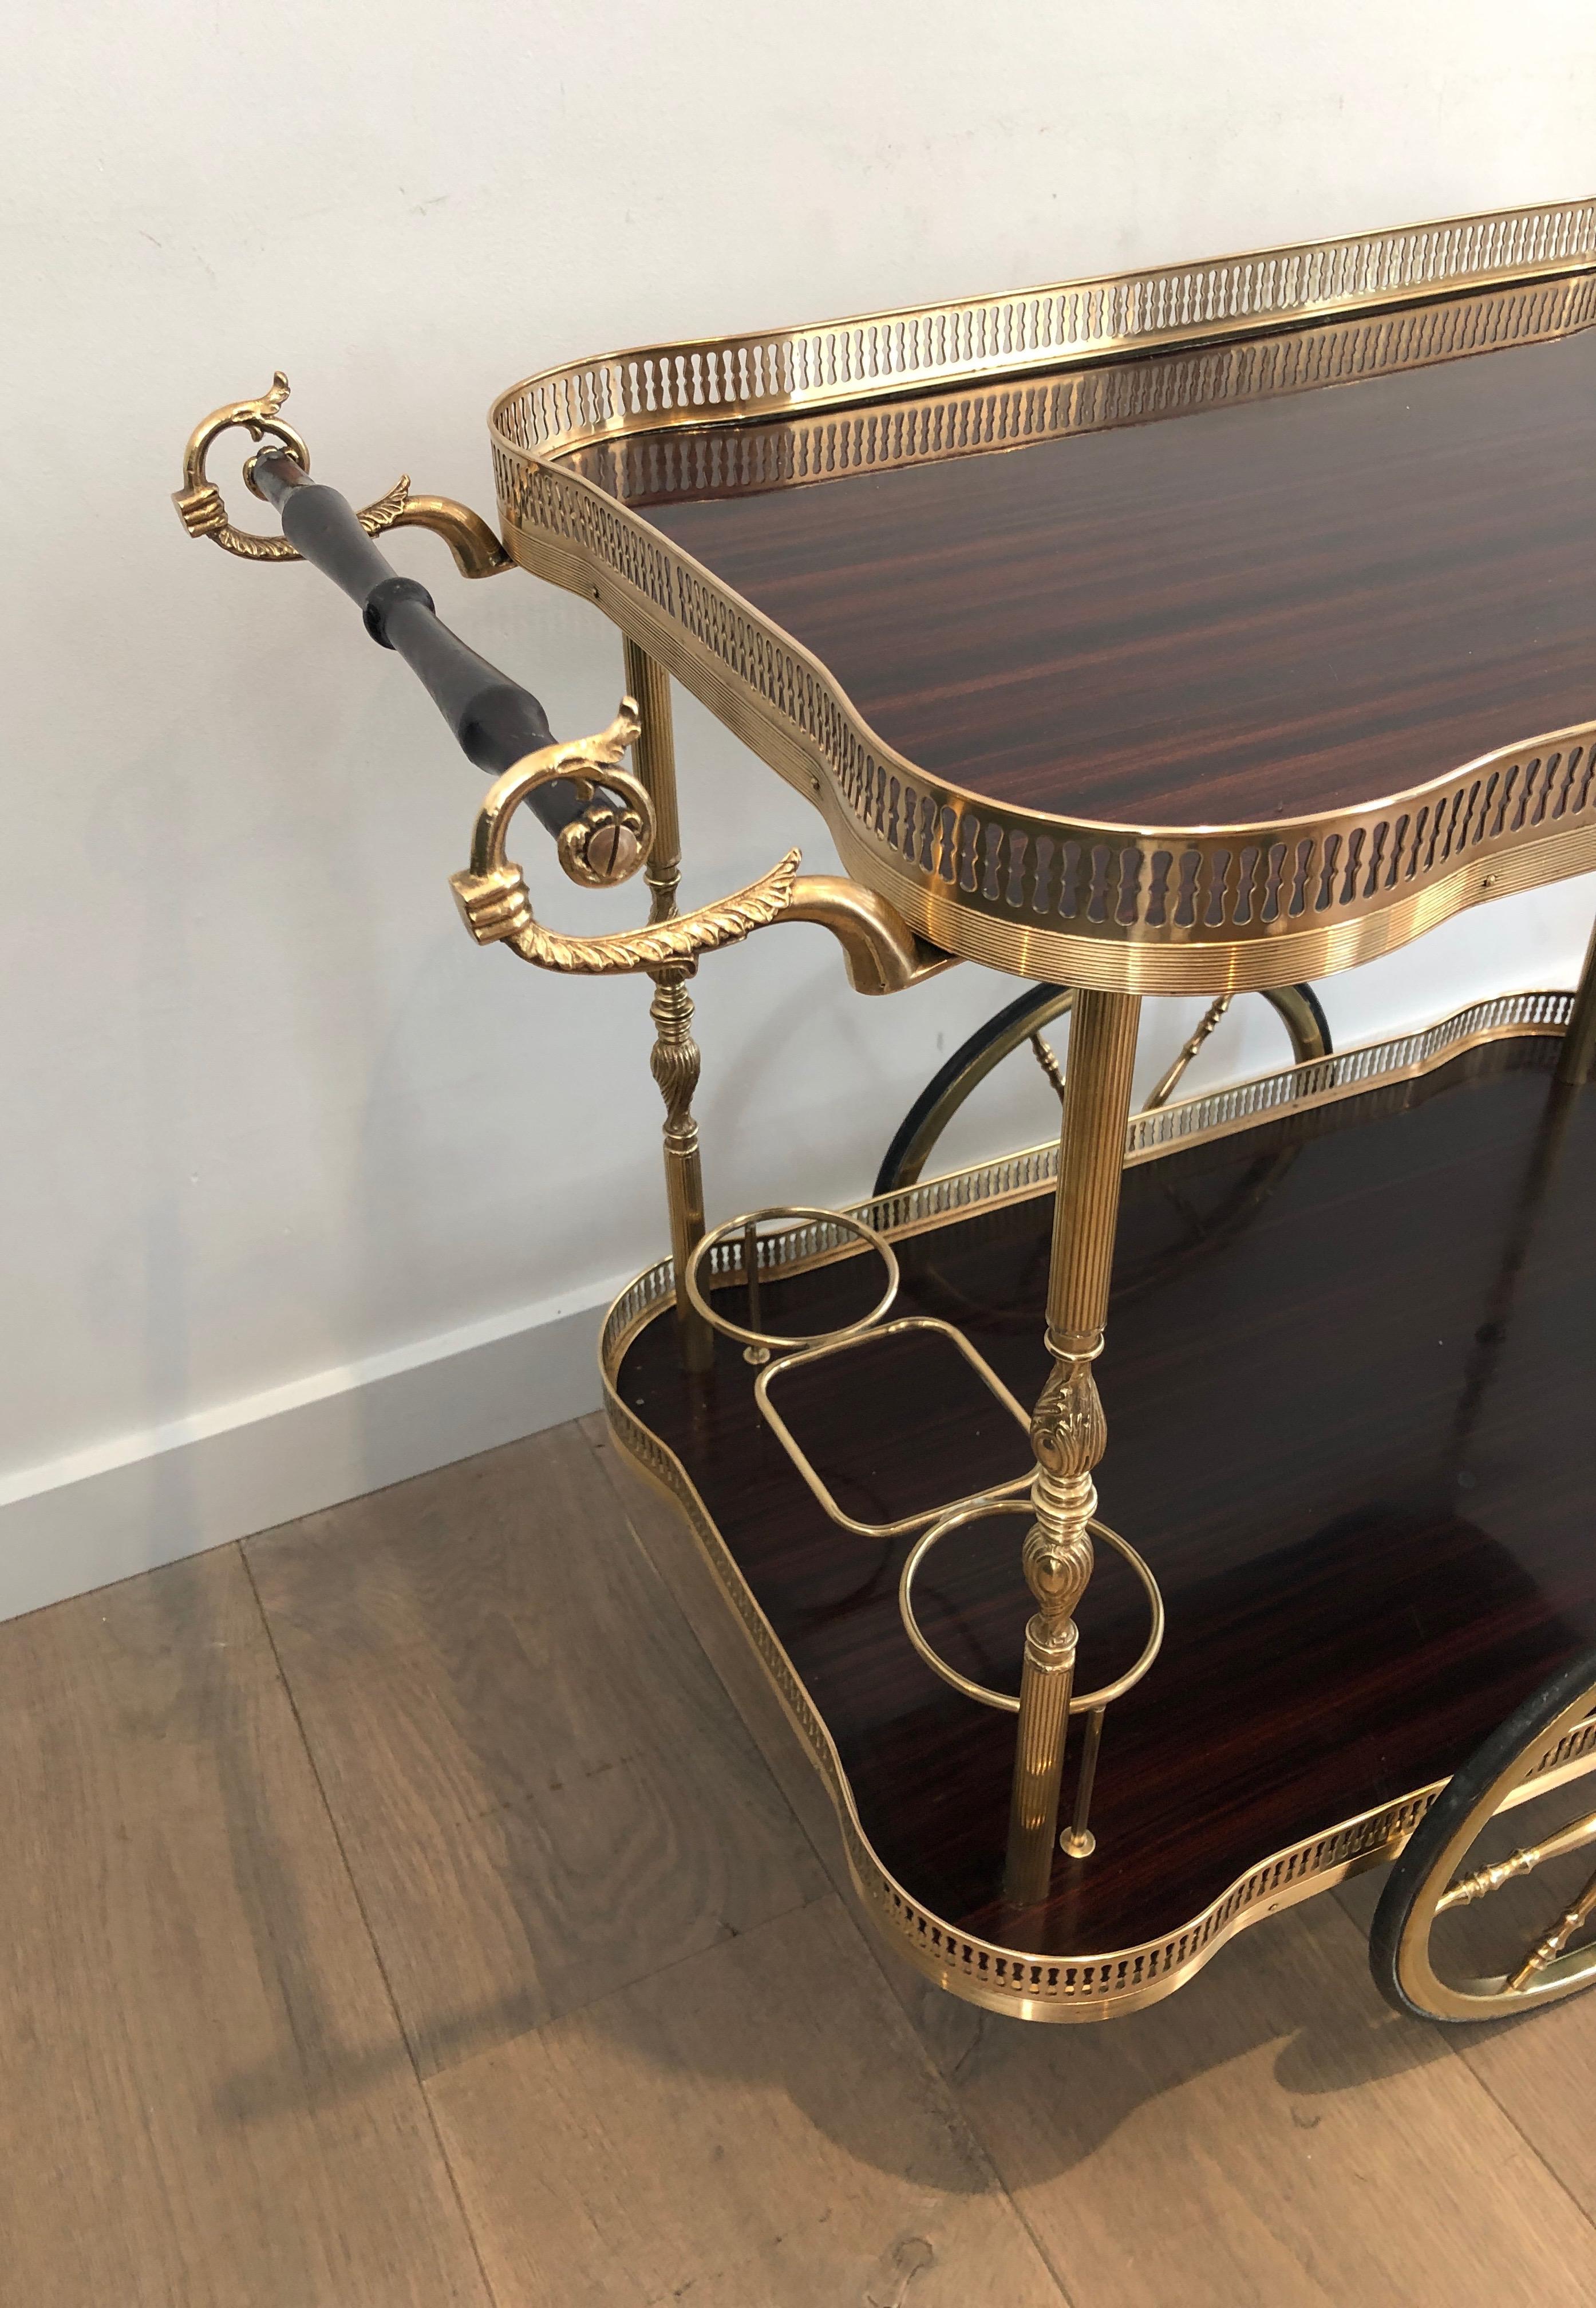 Mid-20th Century Neoclassical Style Mahogany and Brass Drinks Trolley, French, circa 1940